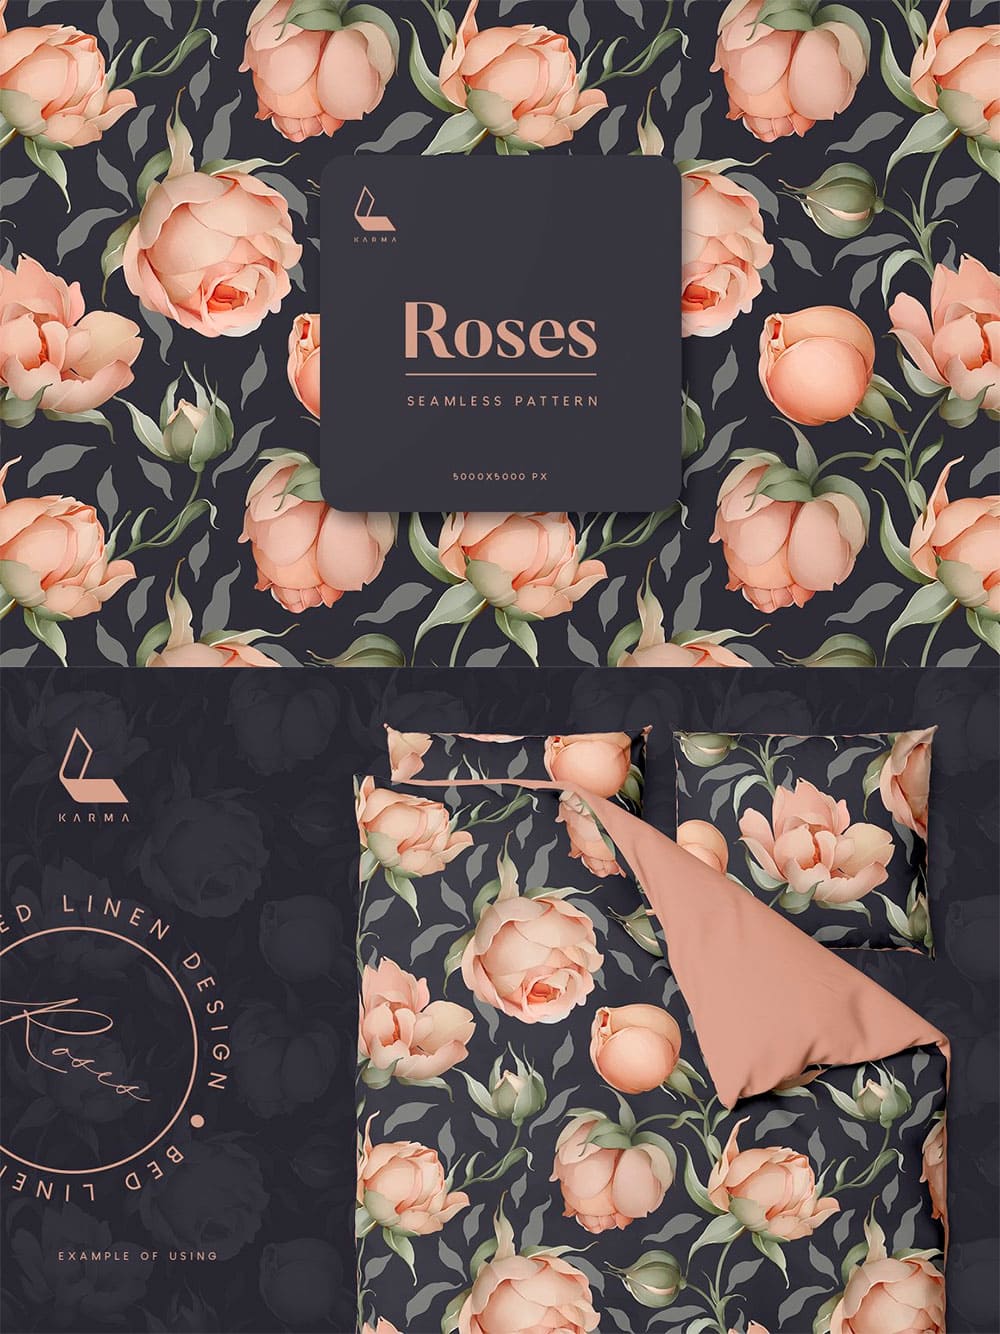 Roses seamless pattern, picture for pinterest.